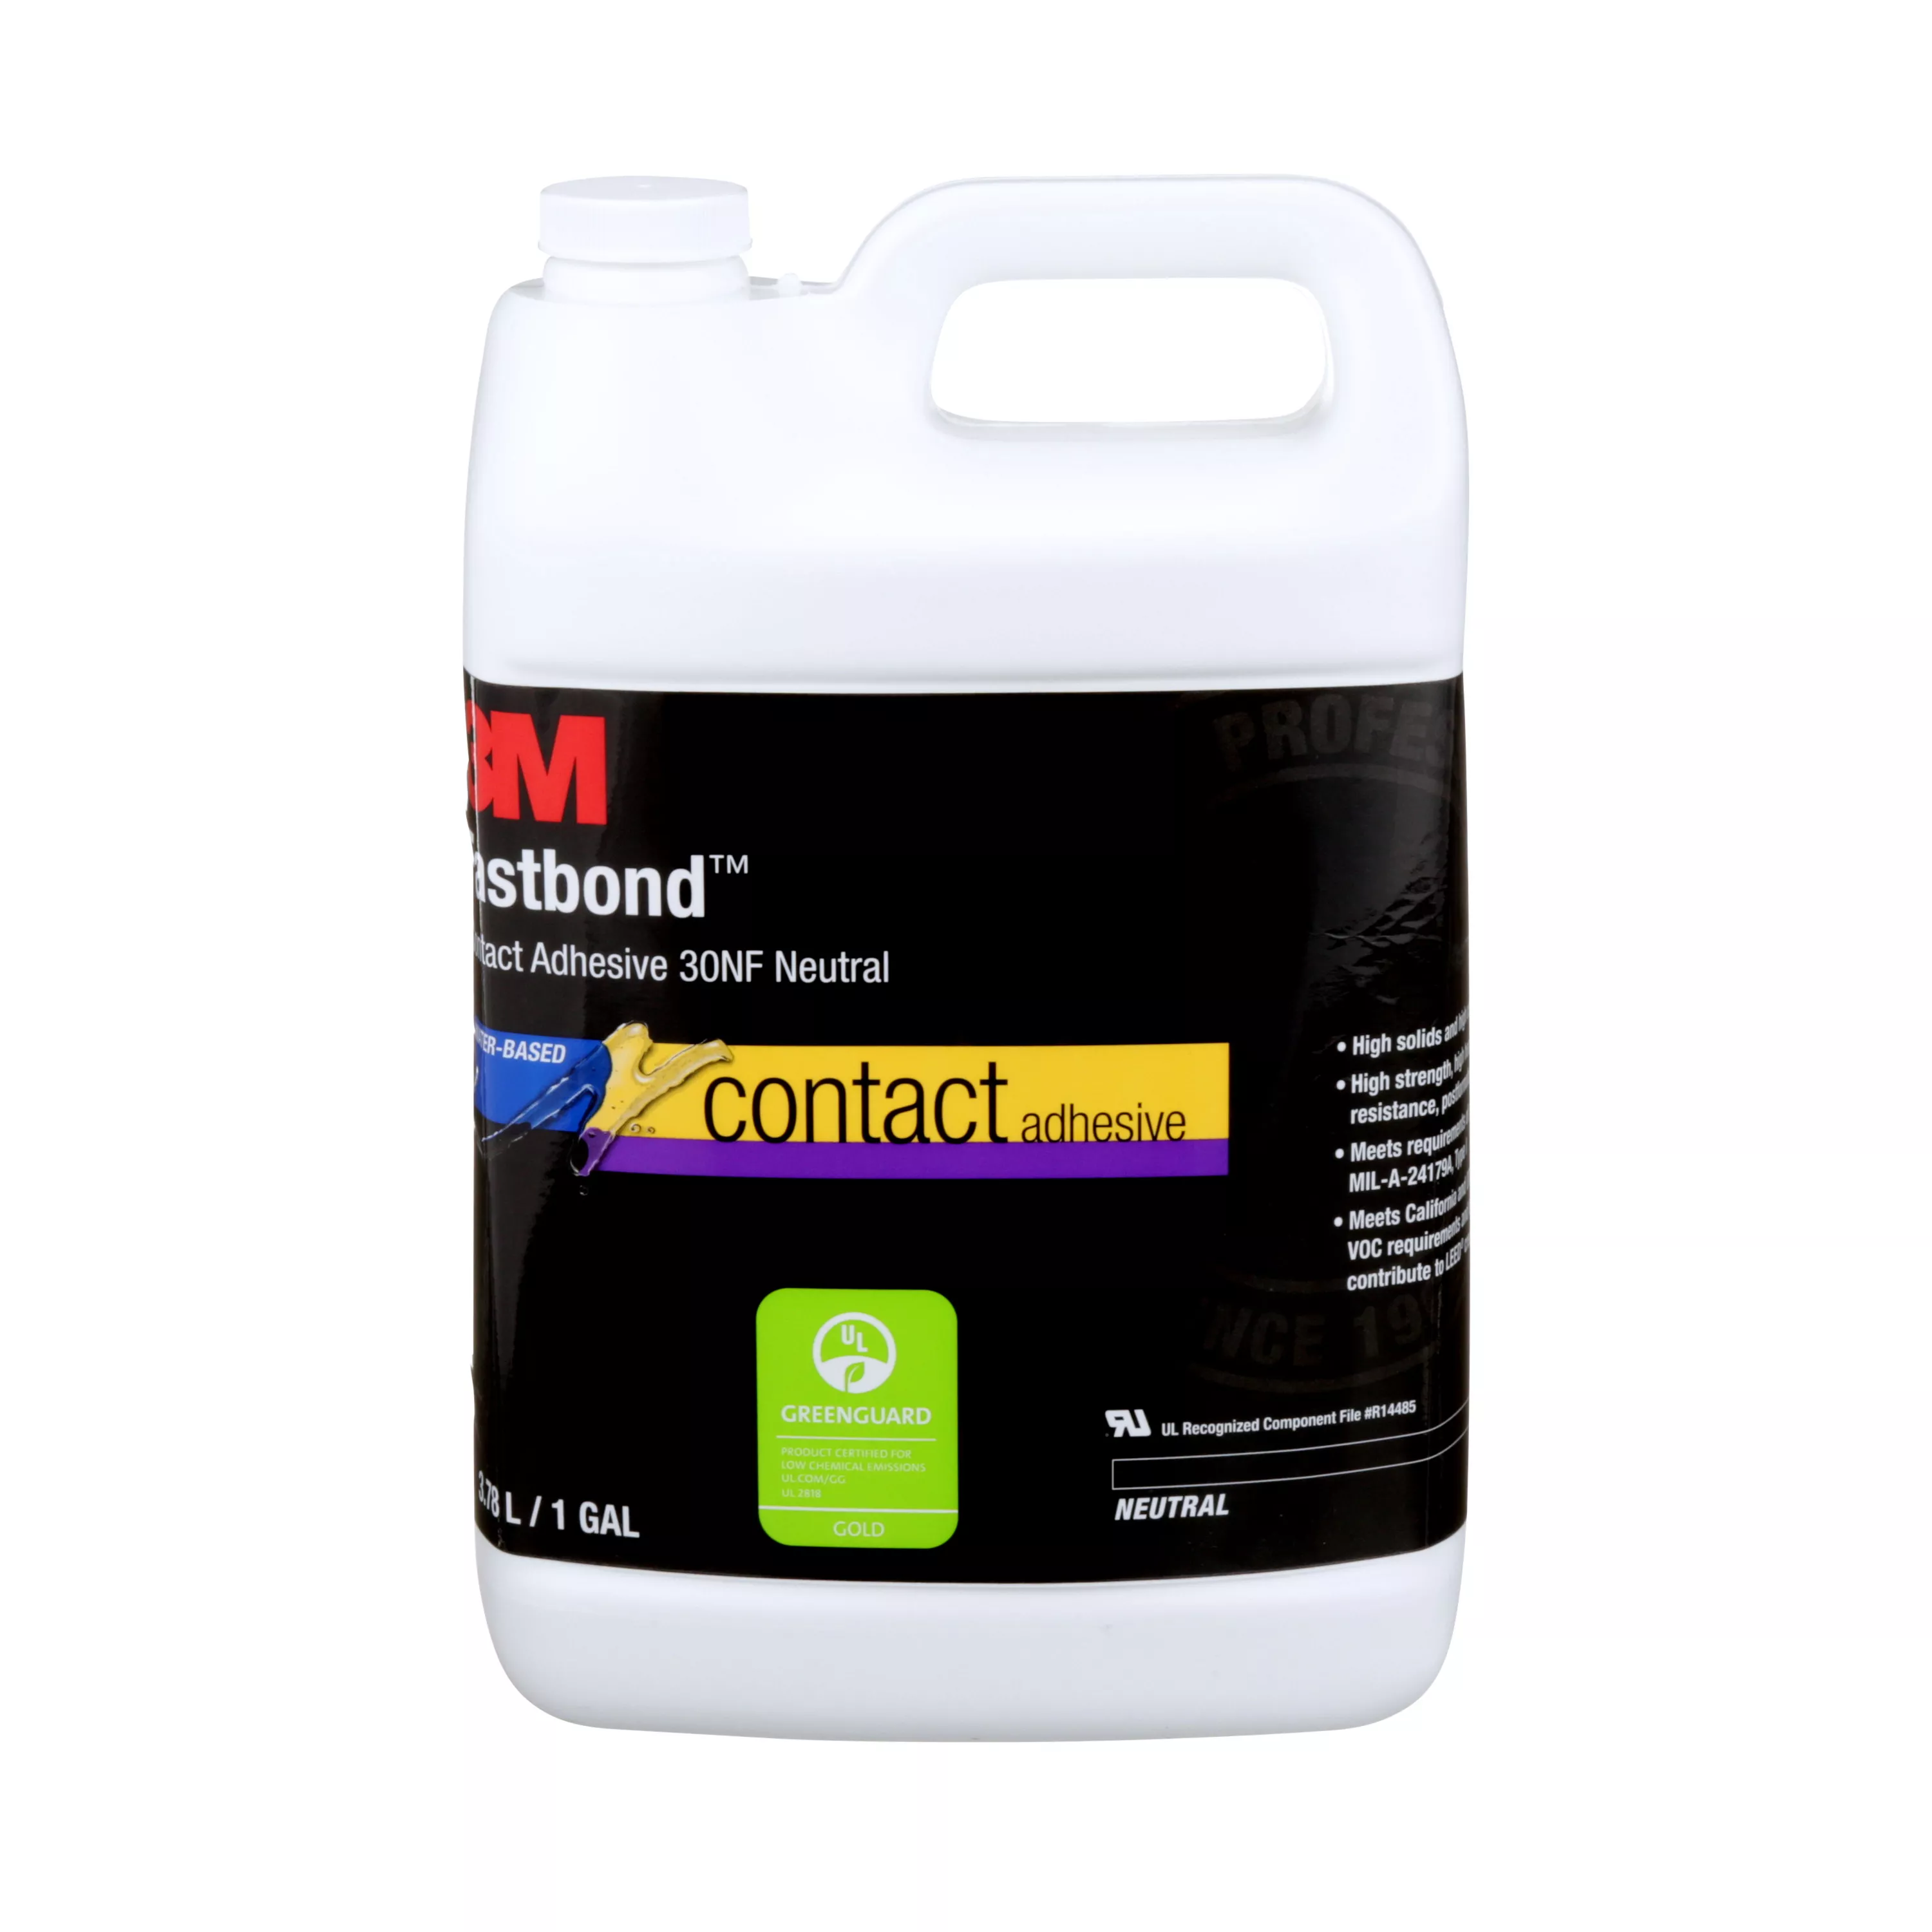 3M™ Fastbond™ Contact Adhesive 30NF, Neutral, 1 Gallon, 4 Can/Case